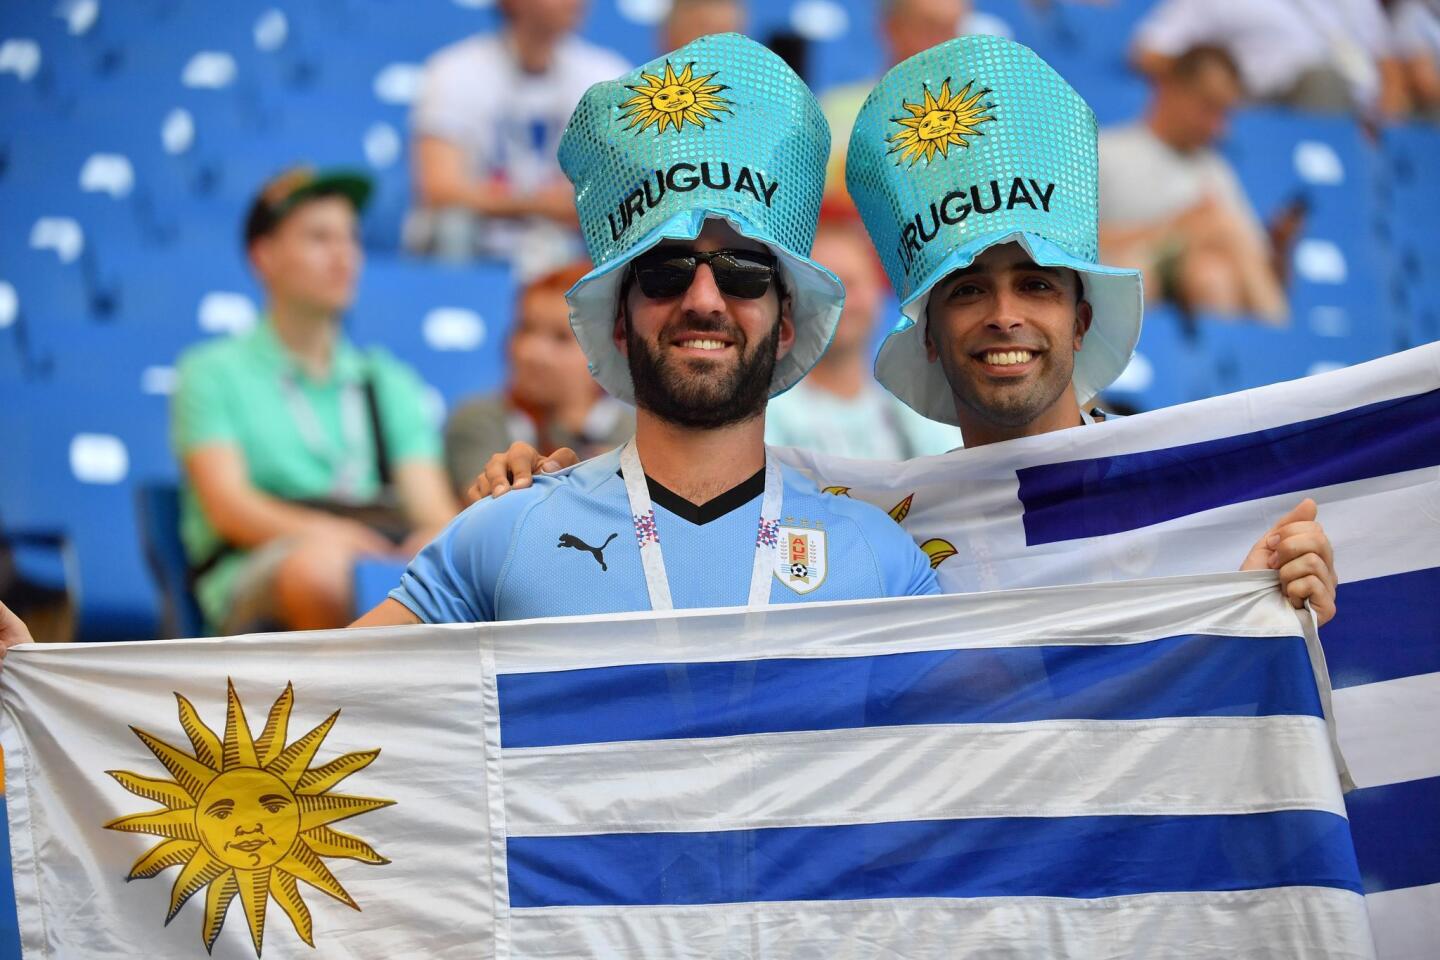 Uruguay fans pose with national flags ahead of kick off of the Russia 2018 World Cup Group A football match between Uruguay and Saudi Arabia at the Rostov Arena in Rostov-On-Don on June 20, 2018. (Photo by Pascal GUYOT / AFP) / RESTRICTED TO EDITORIAL USE - NO MOBILE PUSH ALERTS/DOWNLOADS (Photo credit should read PASCAL GUYOT/AFP/Getty Images)